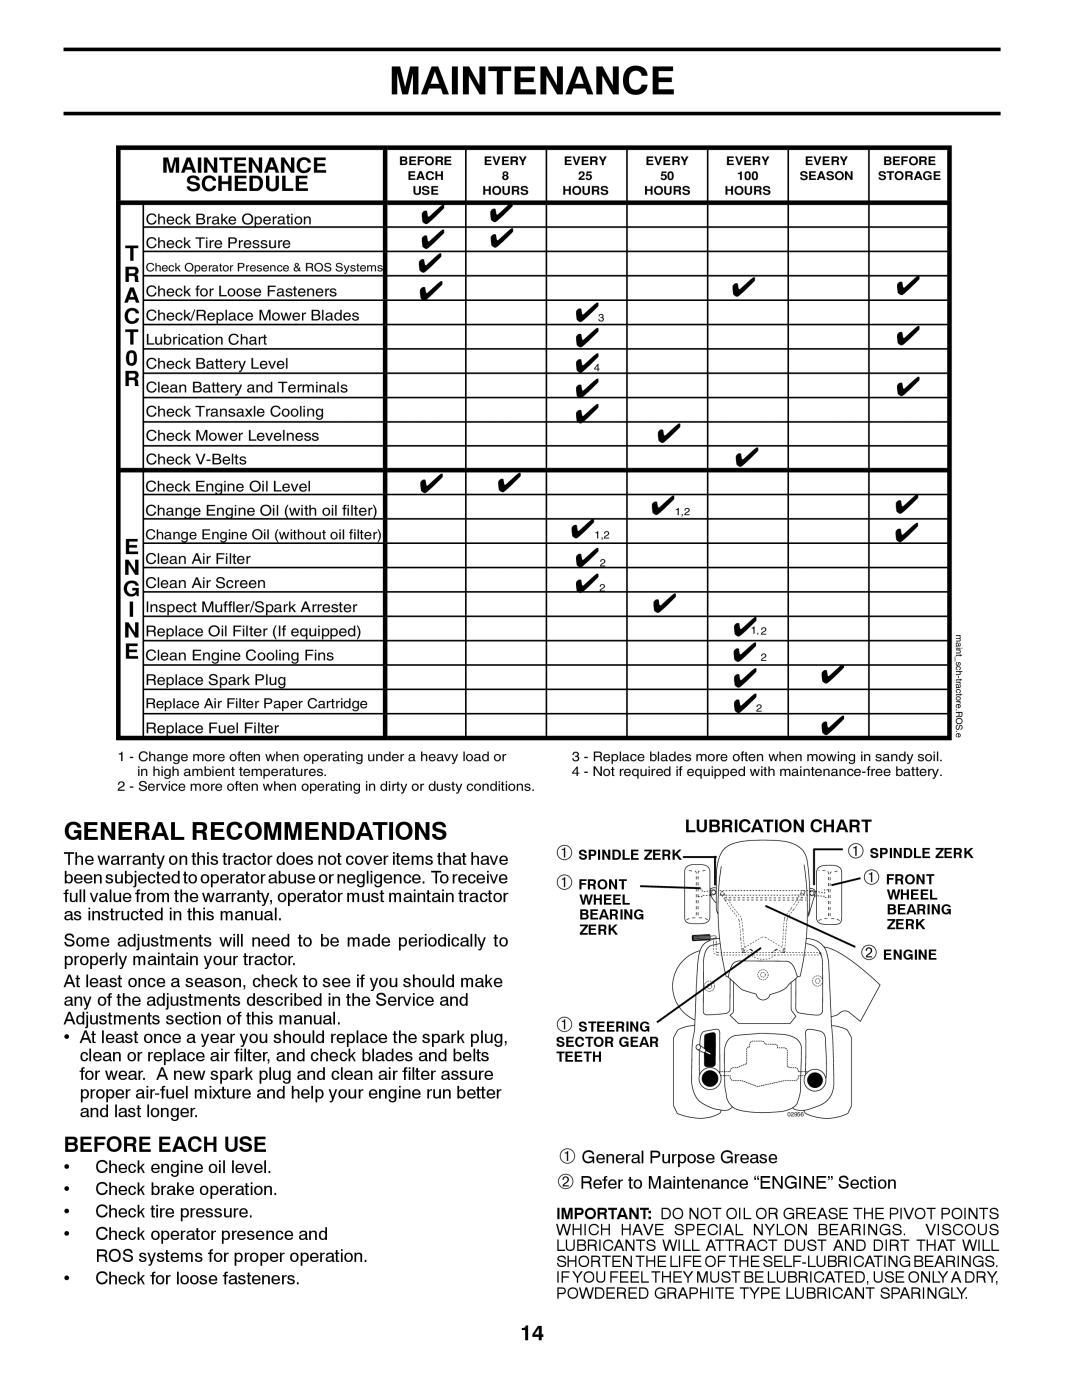 Husqvarna YTH2246 owner manual Maintenance, General Recommendations, Schedule, Before Each Use 